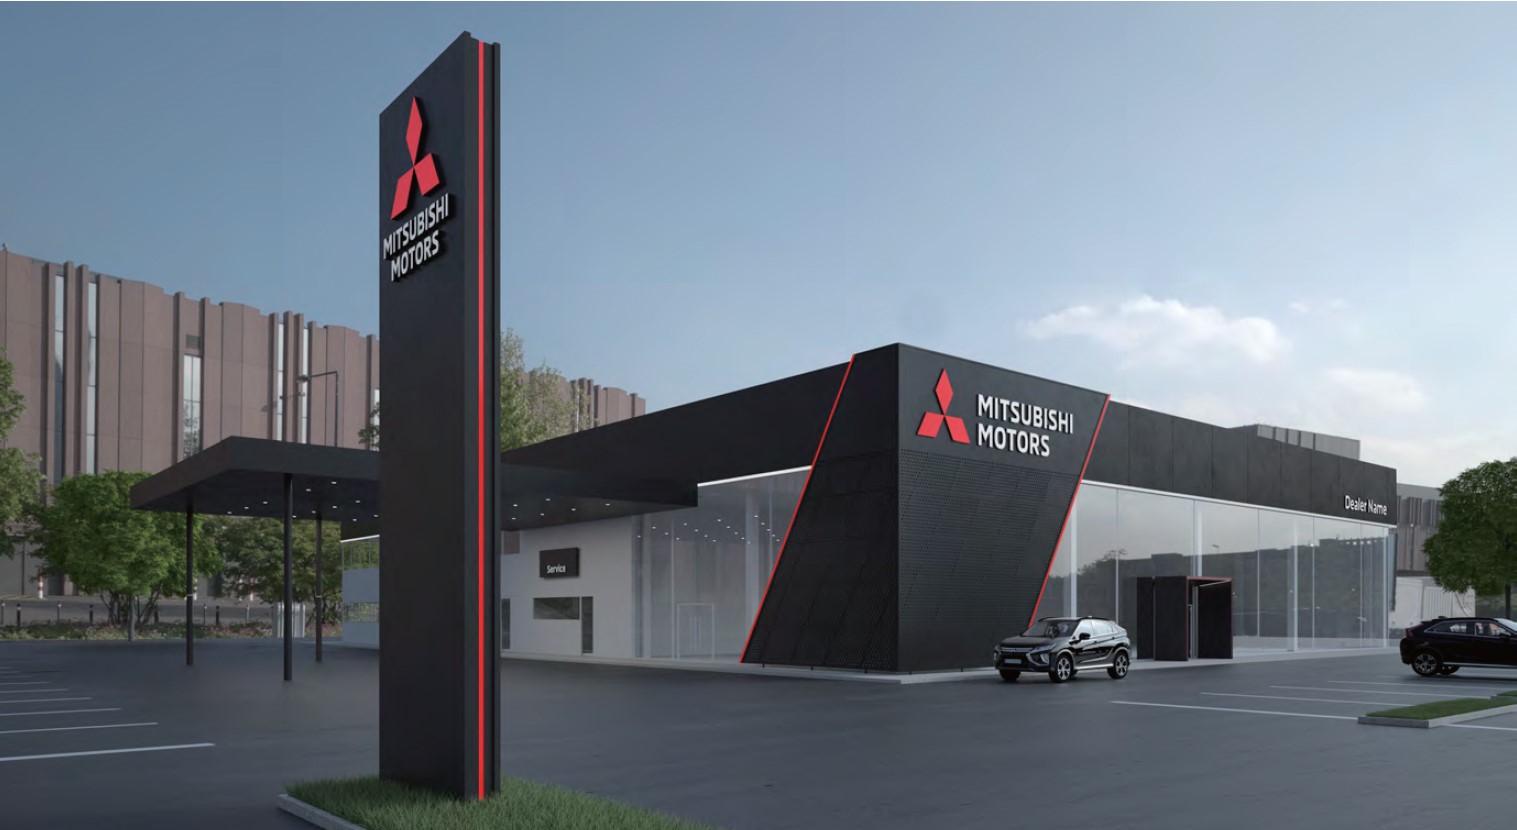 Mitsubishi reveals new corporate identity standards for dealer network